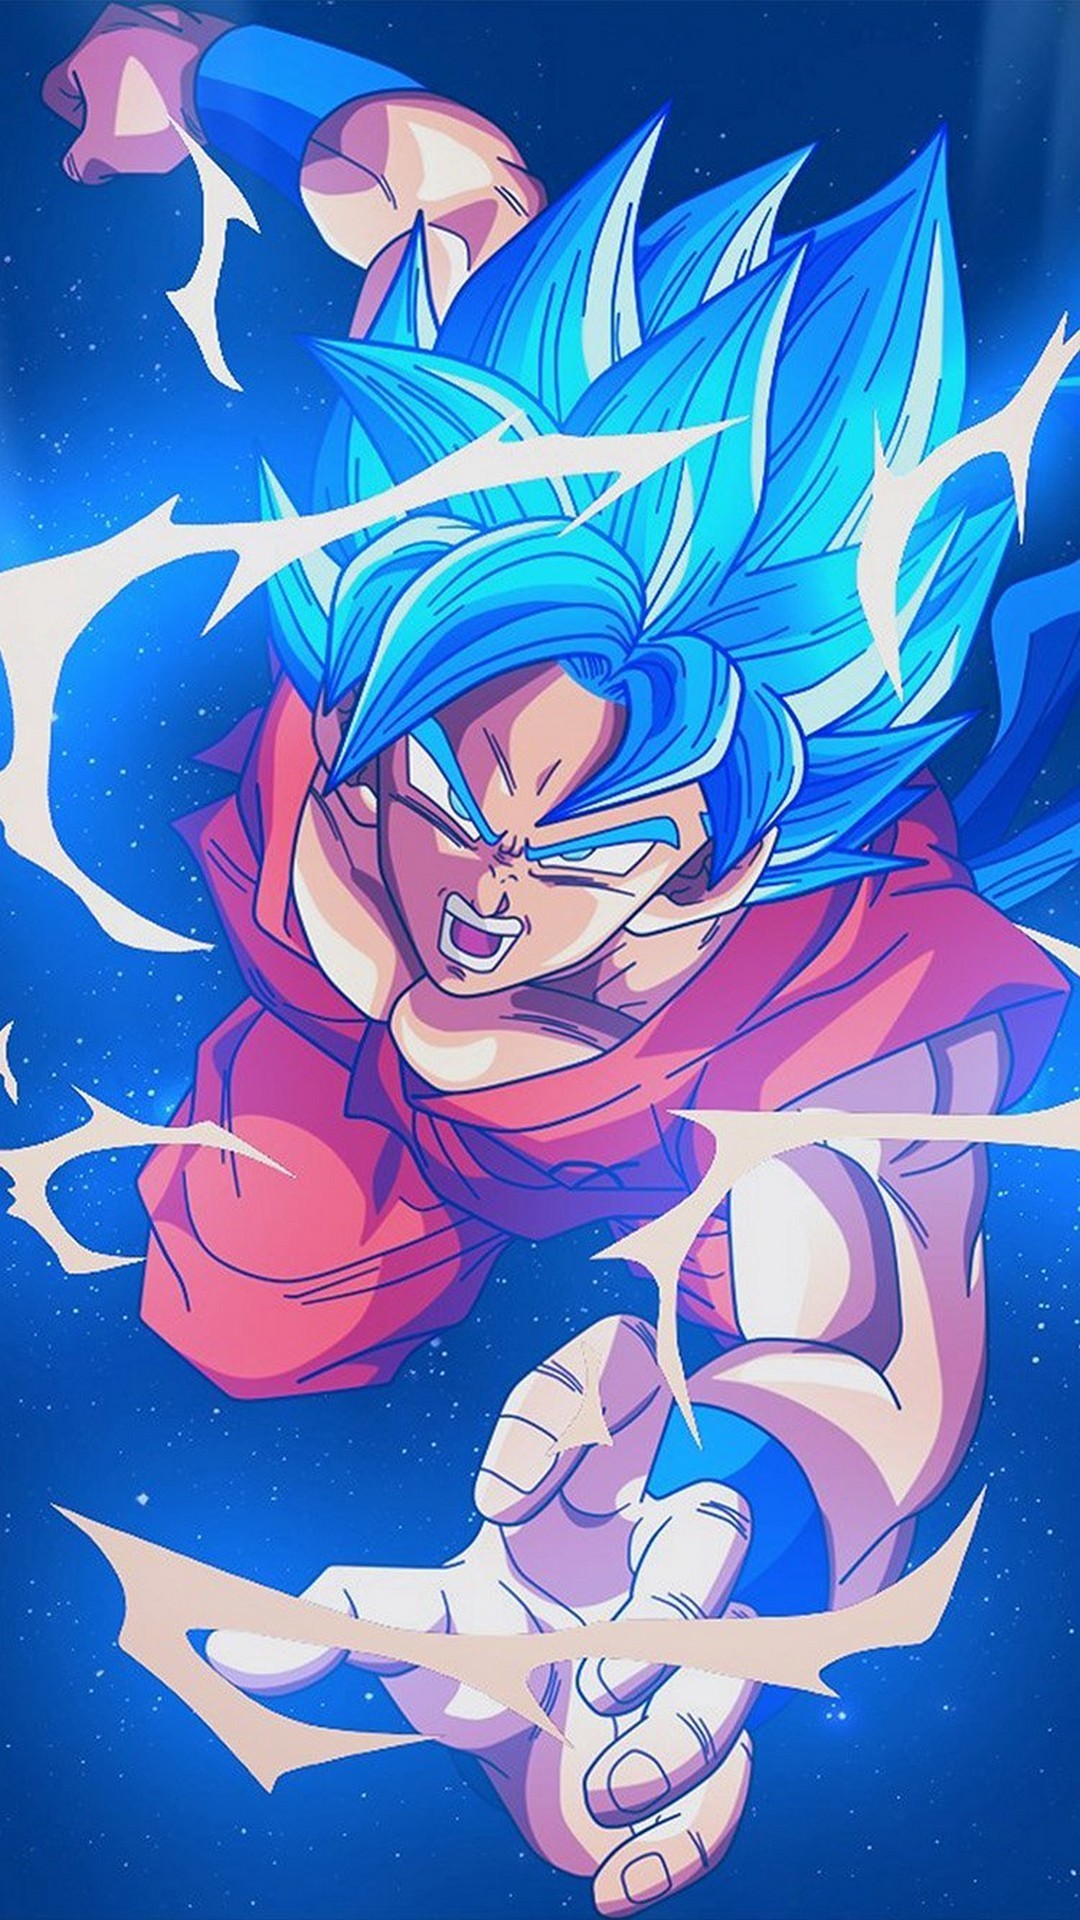 iPhone Wallpaper Goku with image resolution 1080x1920 pixel. You can make this wallpaper for your iPhone 5, 6, 7, 8, X backgrounds, Mobile Screensaver, or iPad Lock Screen